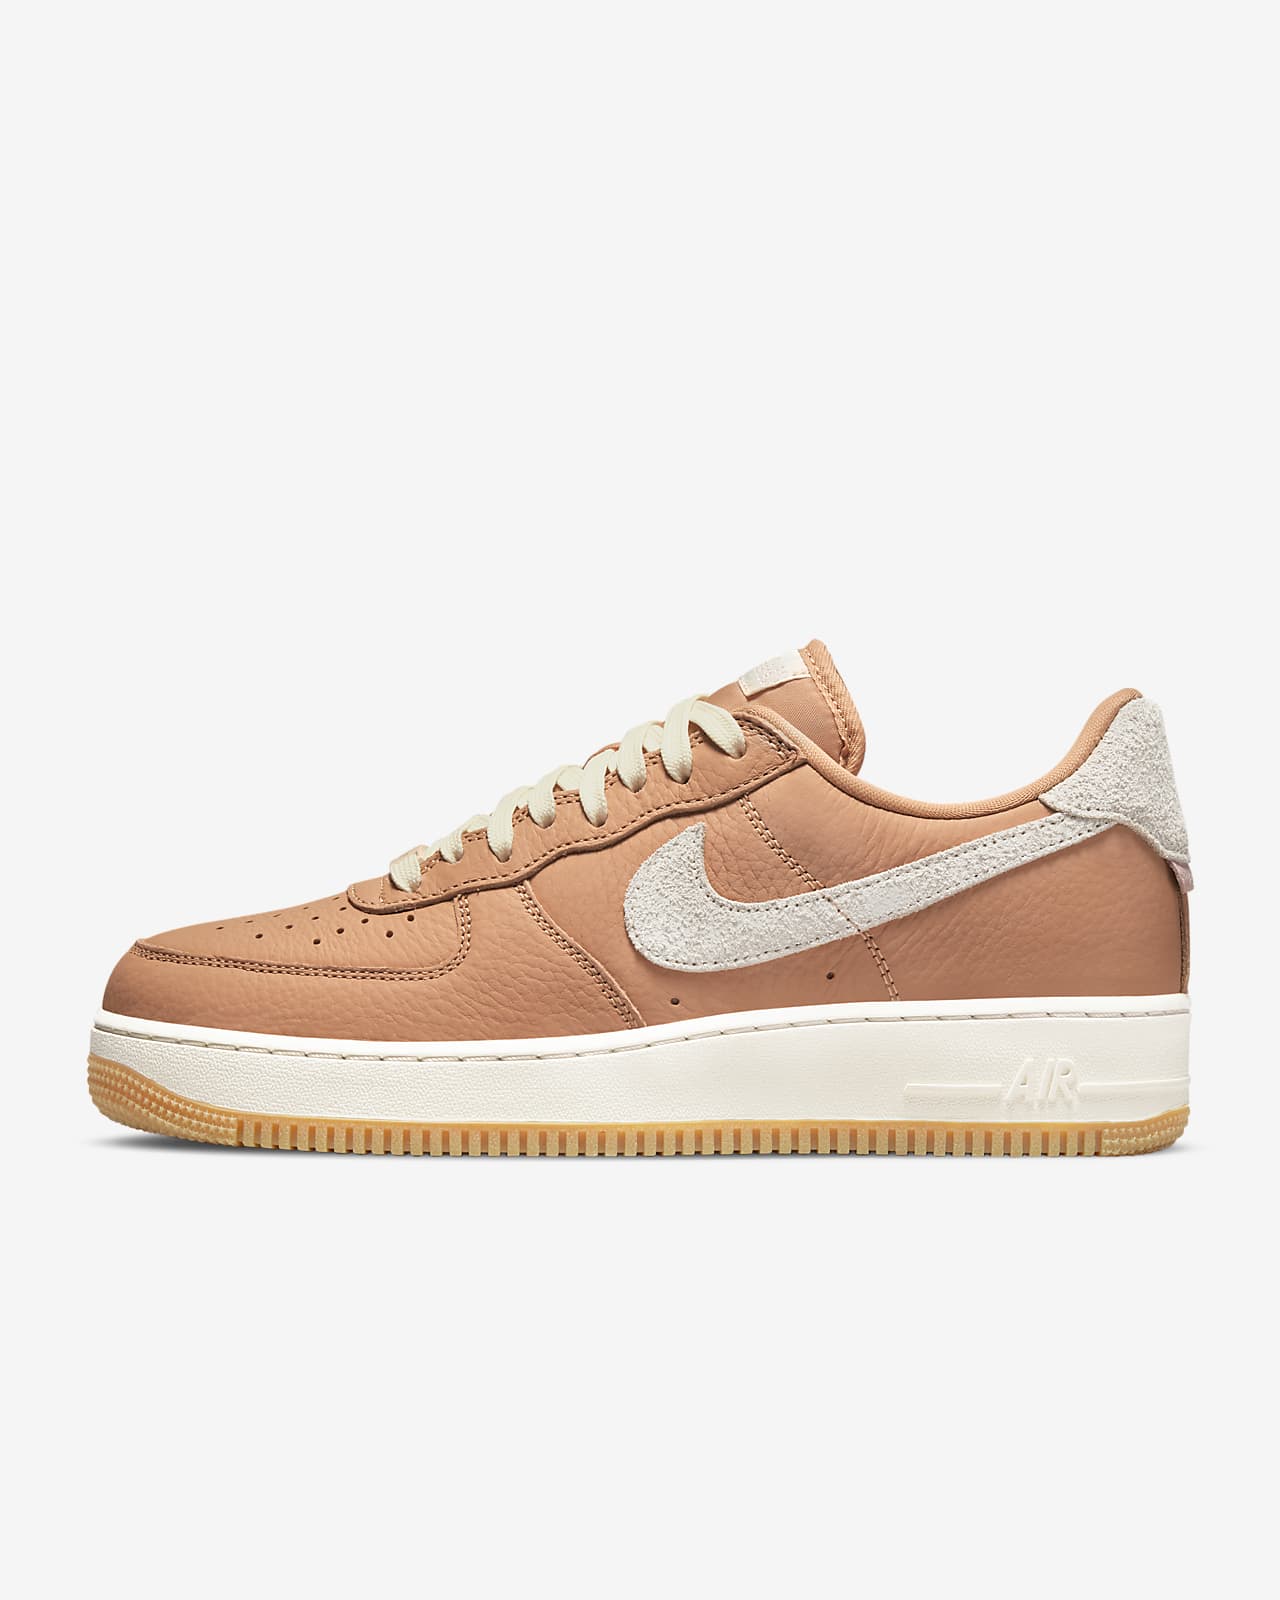 Humble An effective Realm Nike Air Force 1 '07 Craft Men's Shoes. Nike.com